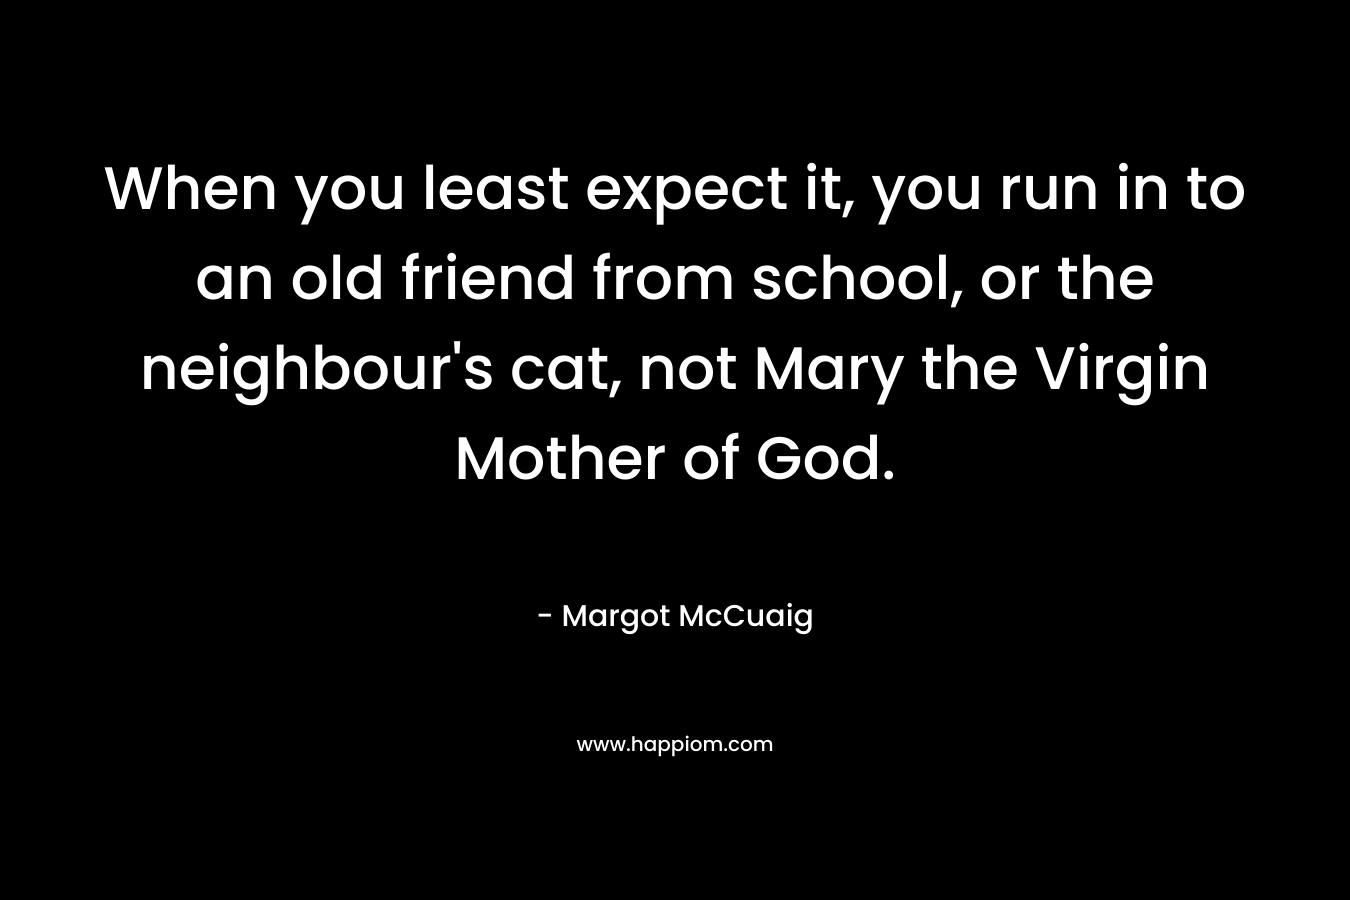 When you least expect it, you run in to an old friend from school, or the neighbour’s cat, not Mary the Virgin Mother of God. – Margot McCuaig